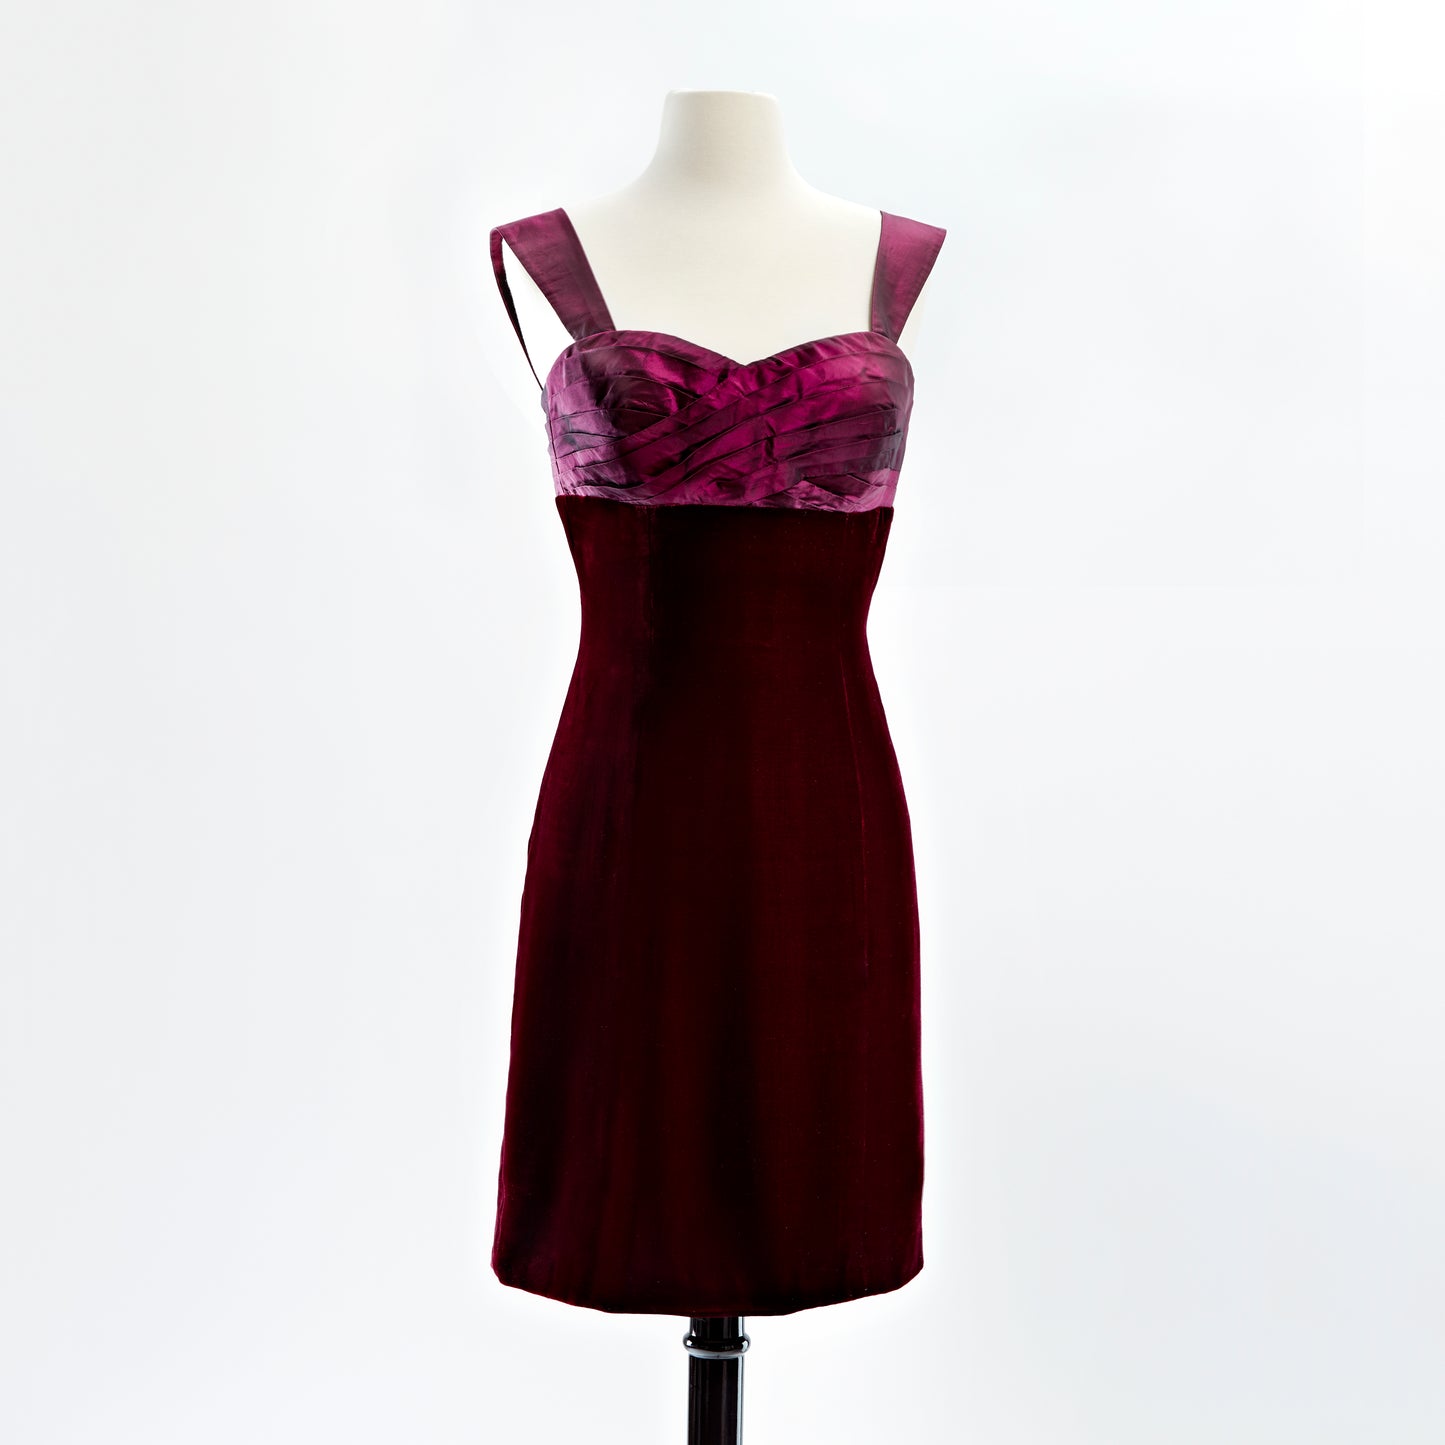 Cocktail dress with hand pleated wine taffeta bodice and velvet skirt with cap sleeves